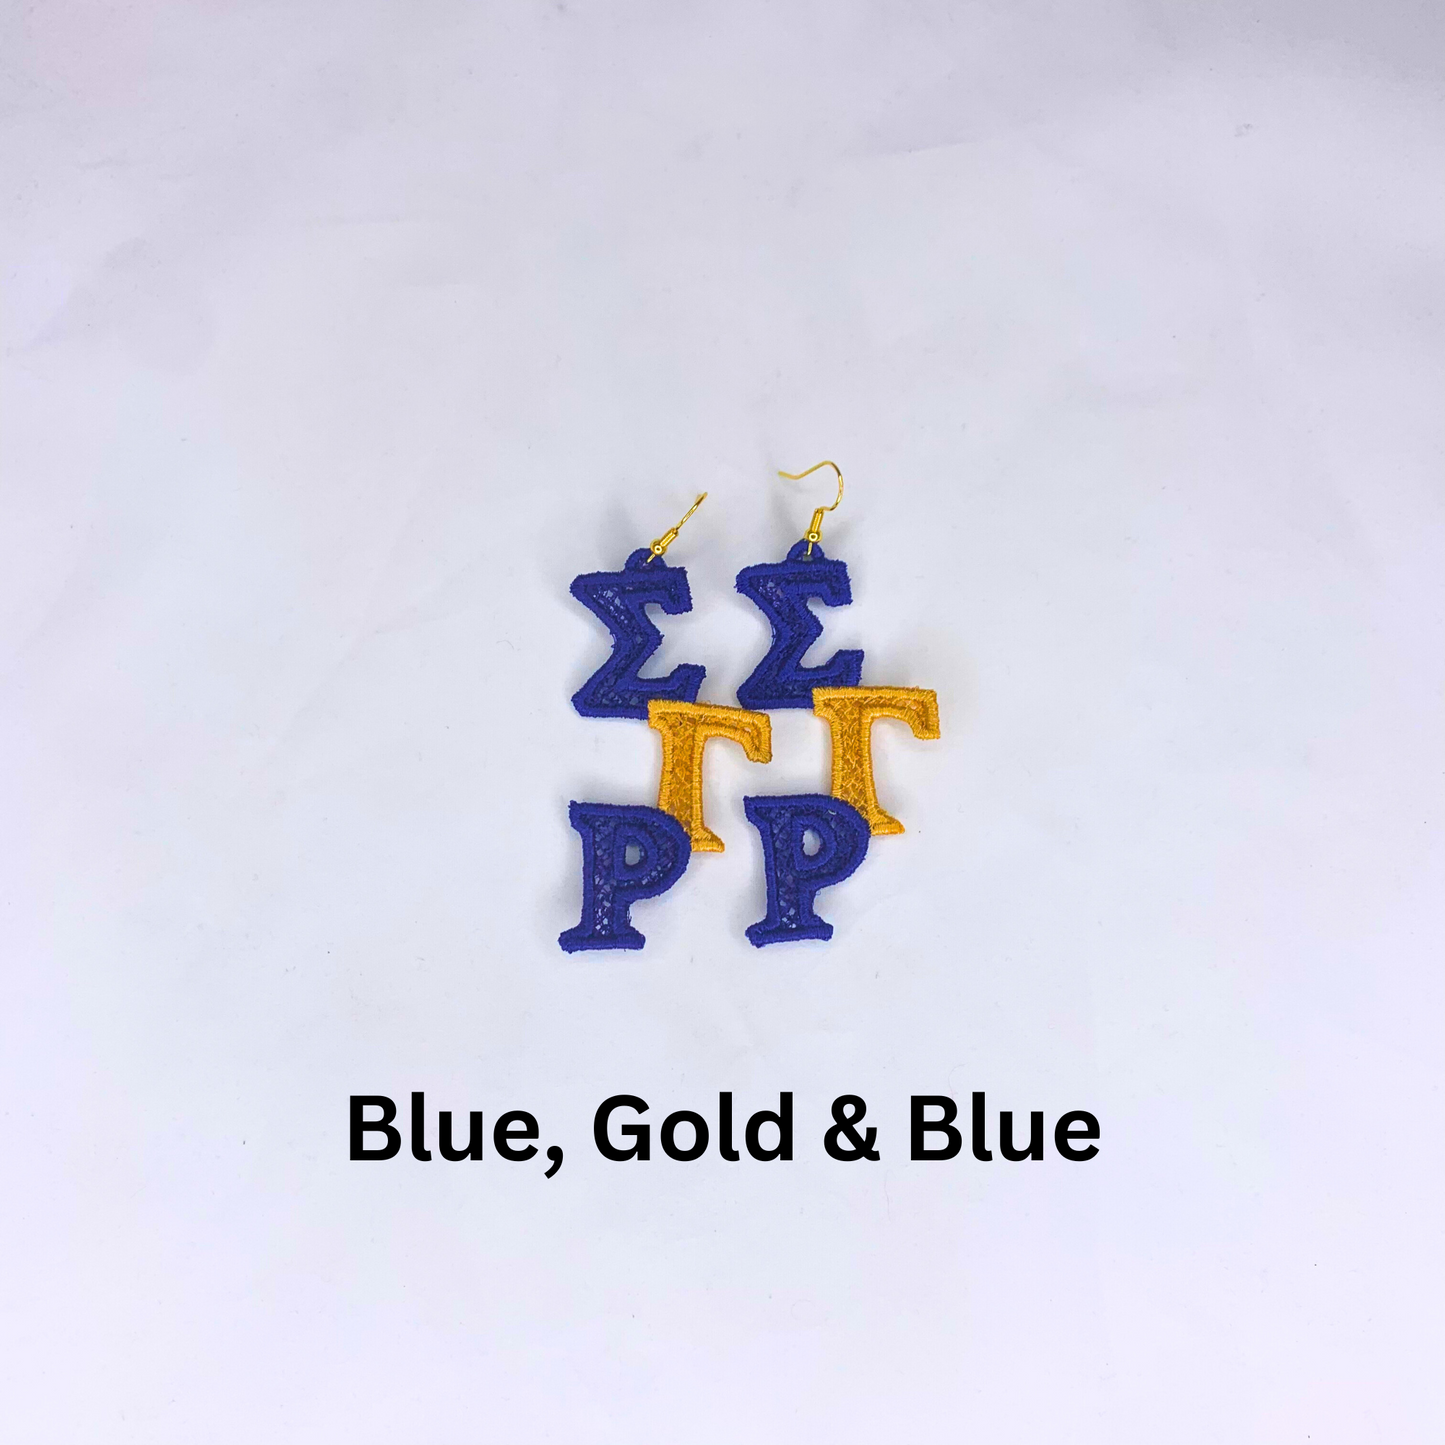 Sigma Gamma Rho Blue and Gold (or Yellow) Embroidered Earrings